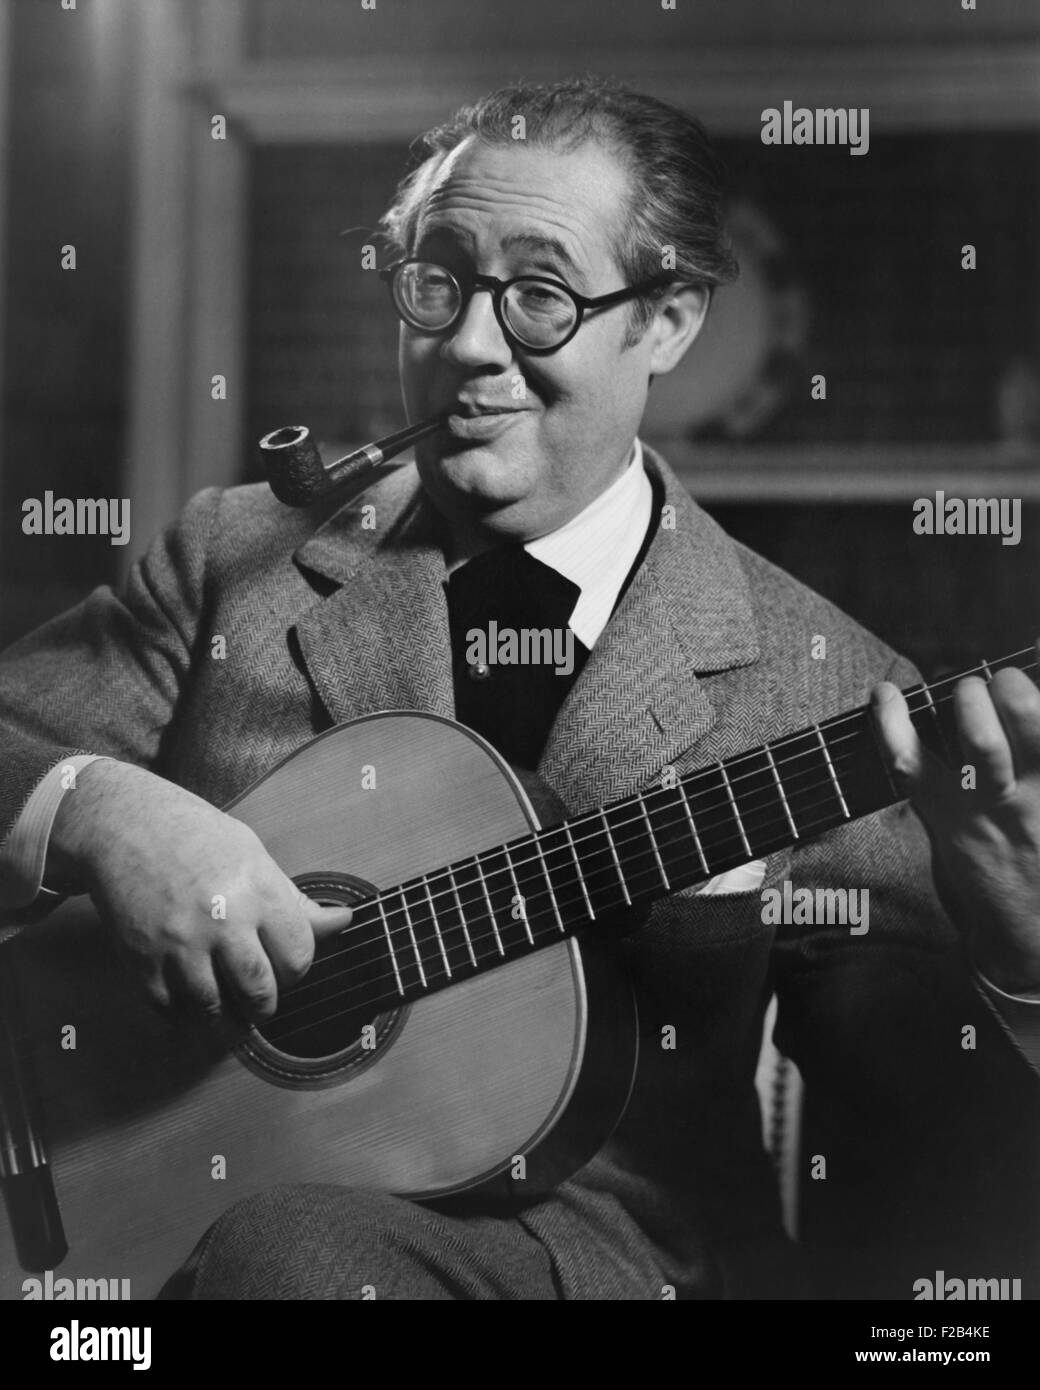 Andres Segovia, Spanish classical guitarist. 1947. Photo by Peggy Duffy. - (BSLOC 2015 1 22) Stock Photo